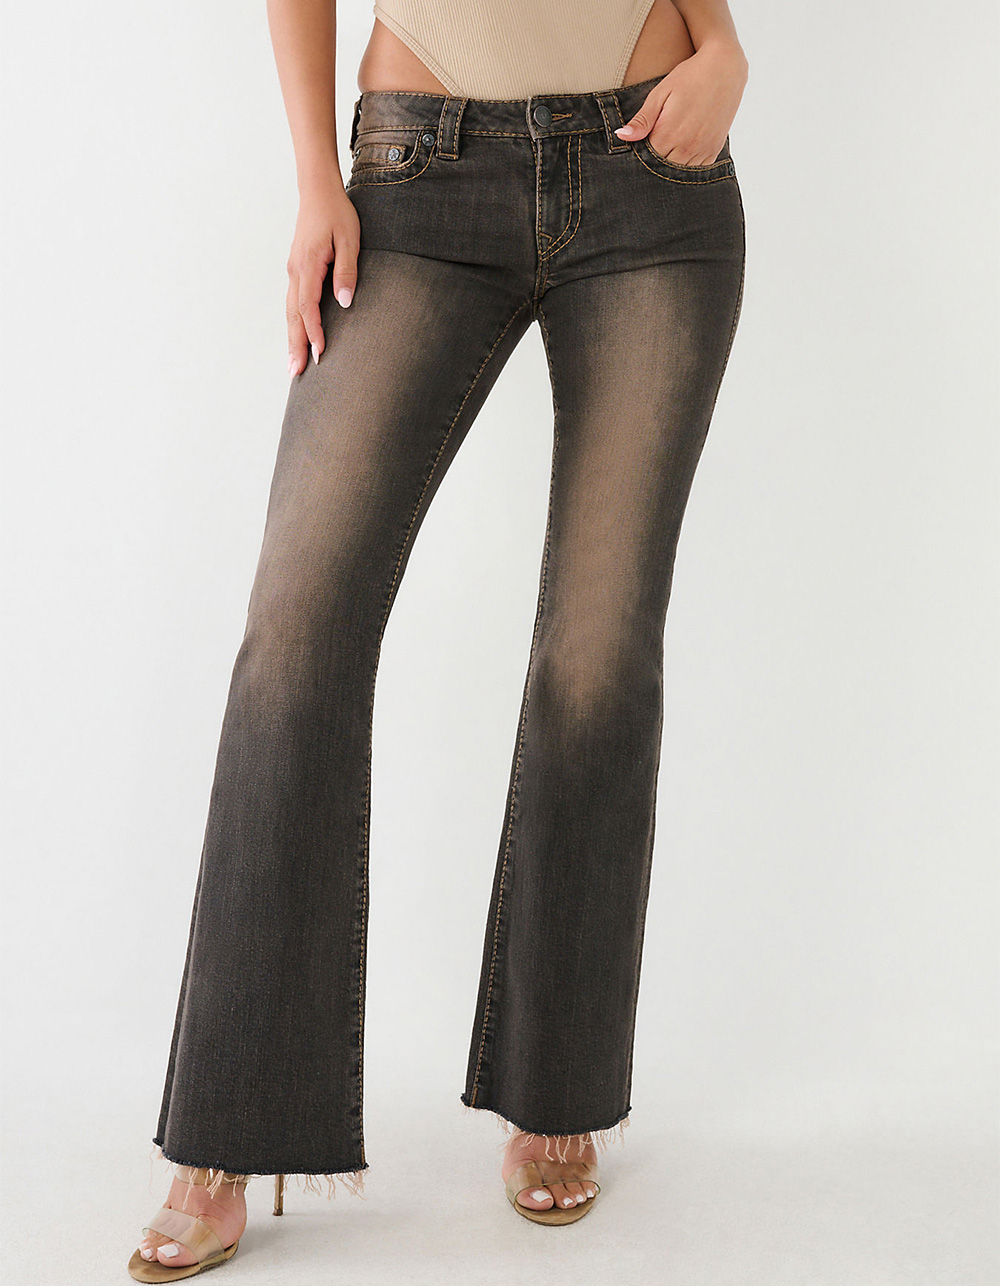 Women's Jeans, Bootcut, Low-Rise + More, Urban Outfitters